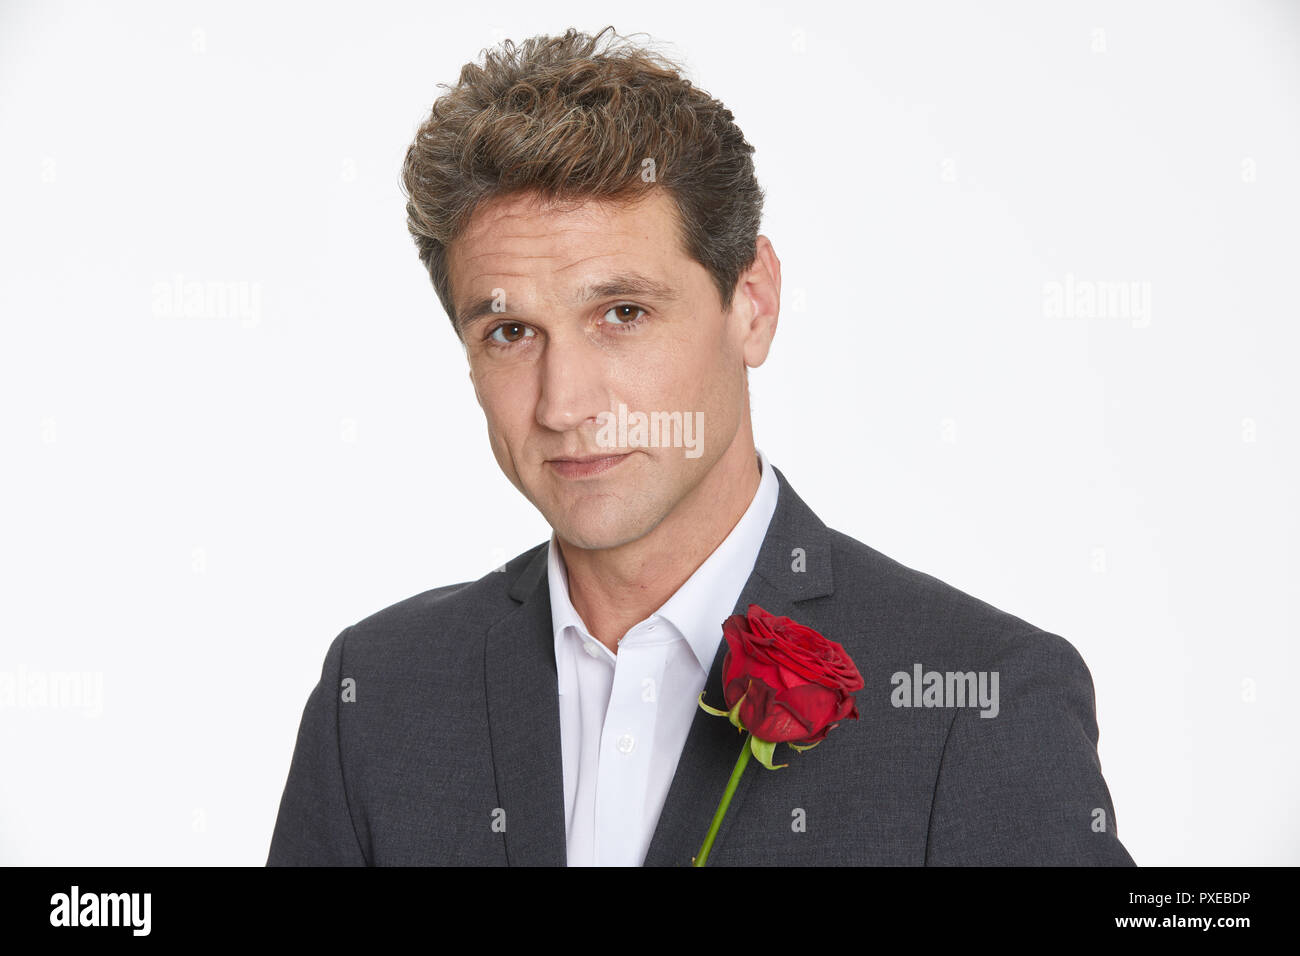 Hamburg, Germany. 22nd Oct, 2018. The actor Oliver Franck in the role of  Luke, taken at a photo shoot for the new season of the ARD telenovela "Rote  Rosen". Credit: Georg Wendt/dpa/Alamy